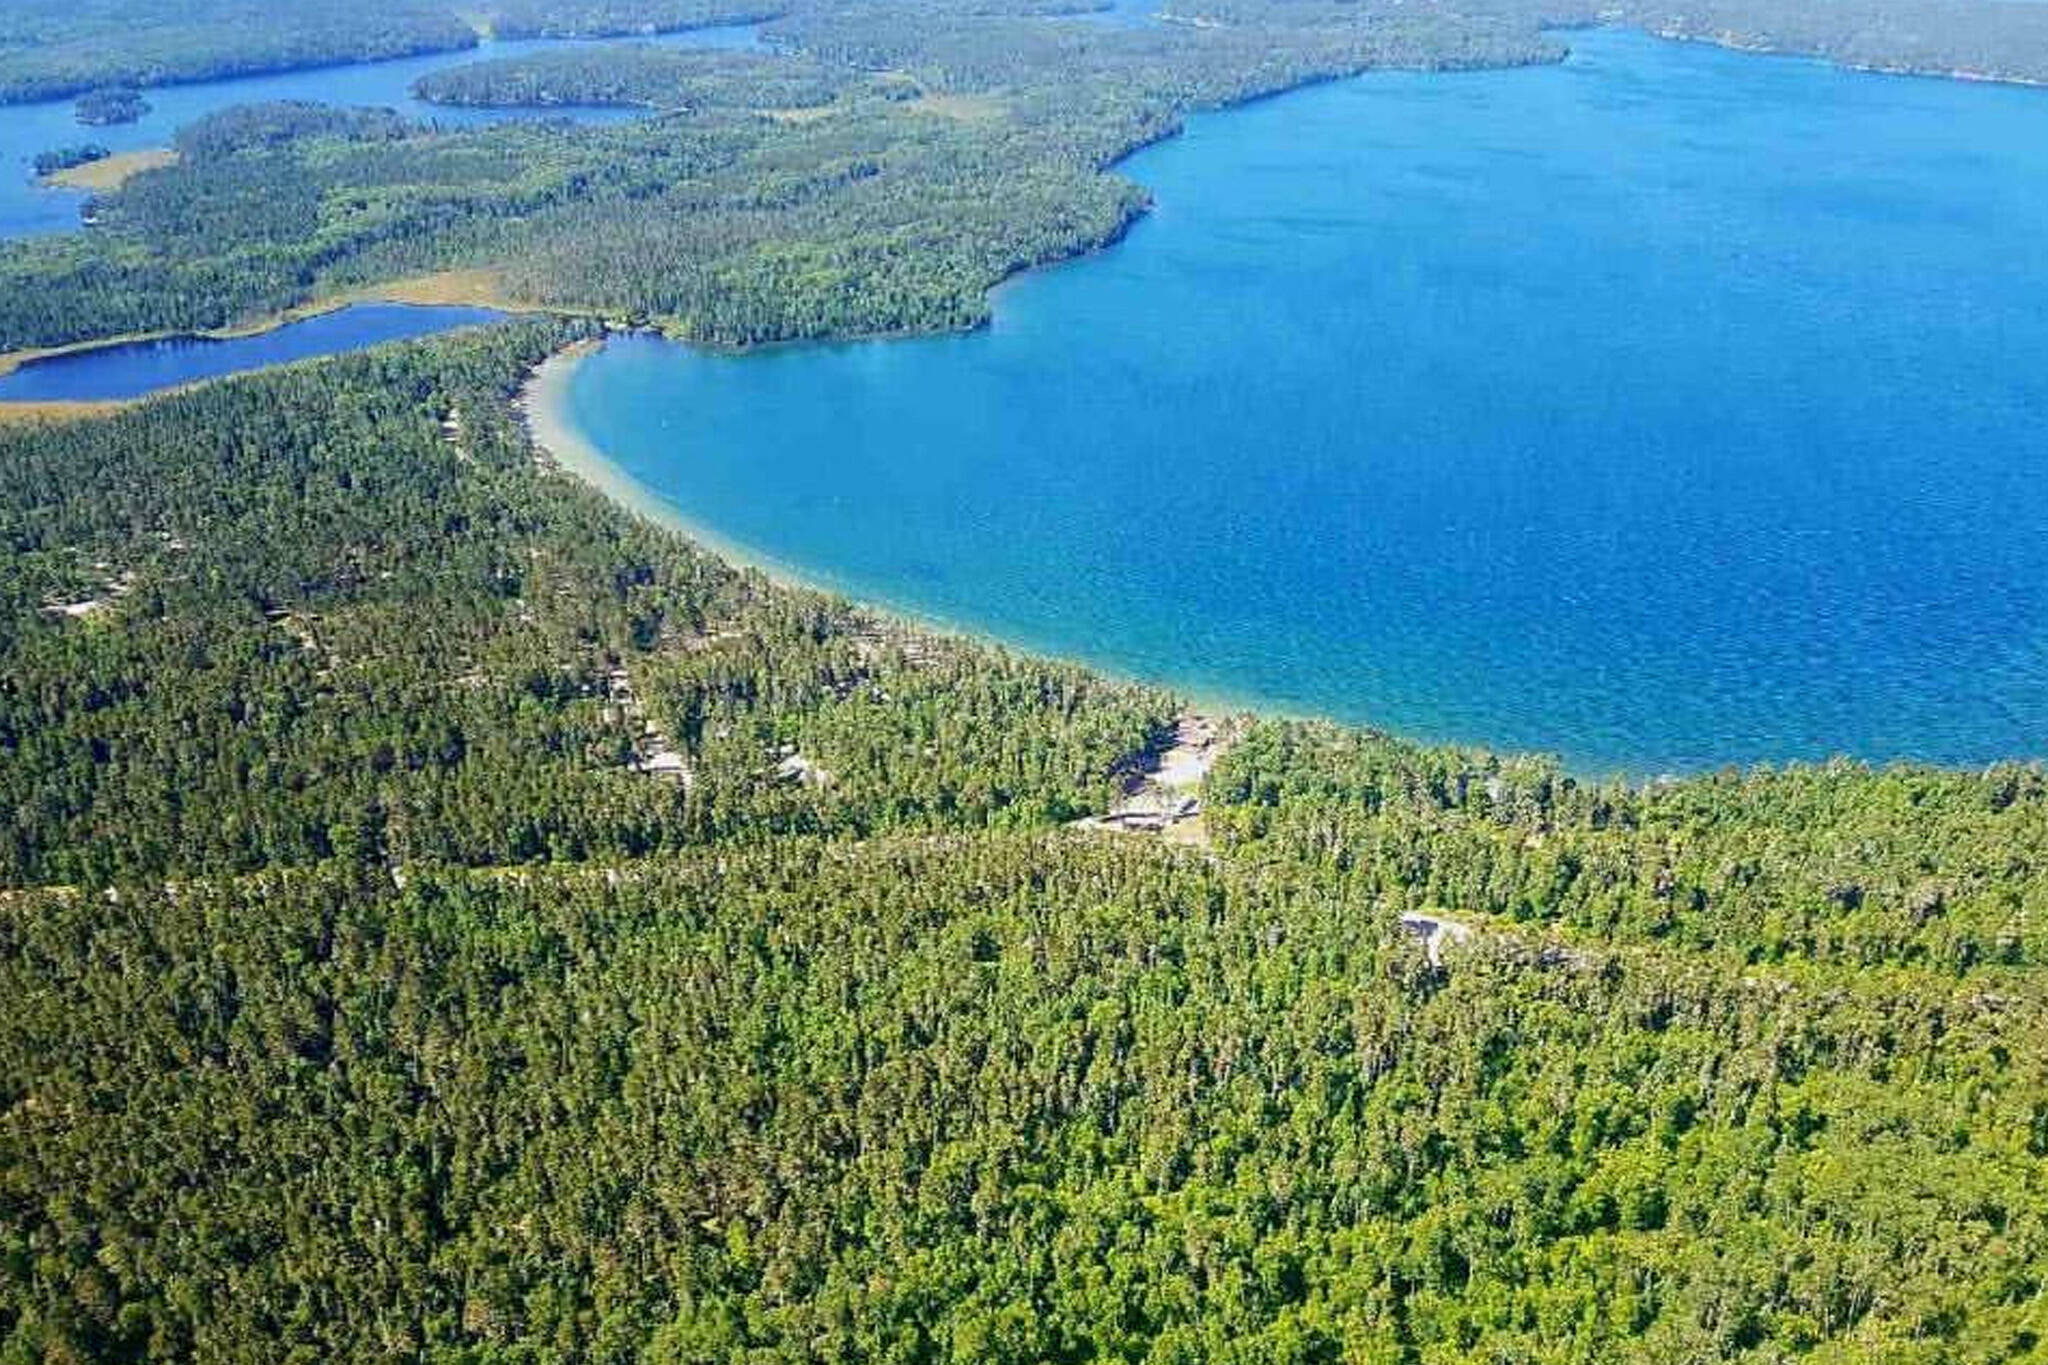 Ontario's Blue Lake Provincial Park has enchanting crystal clear blue water